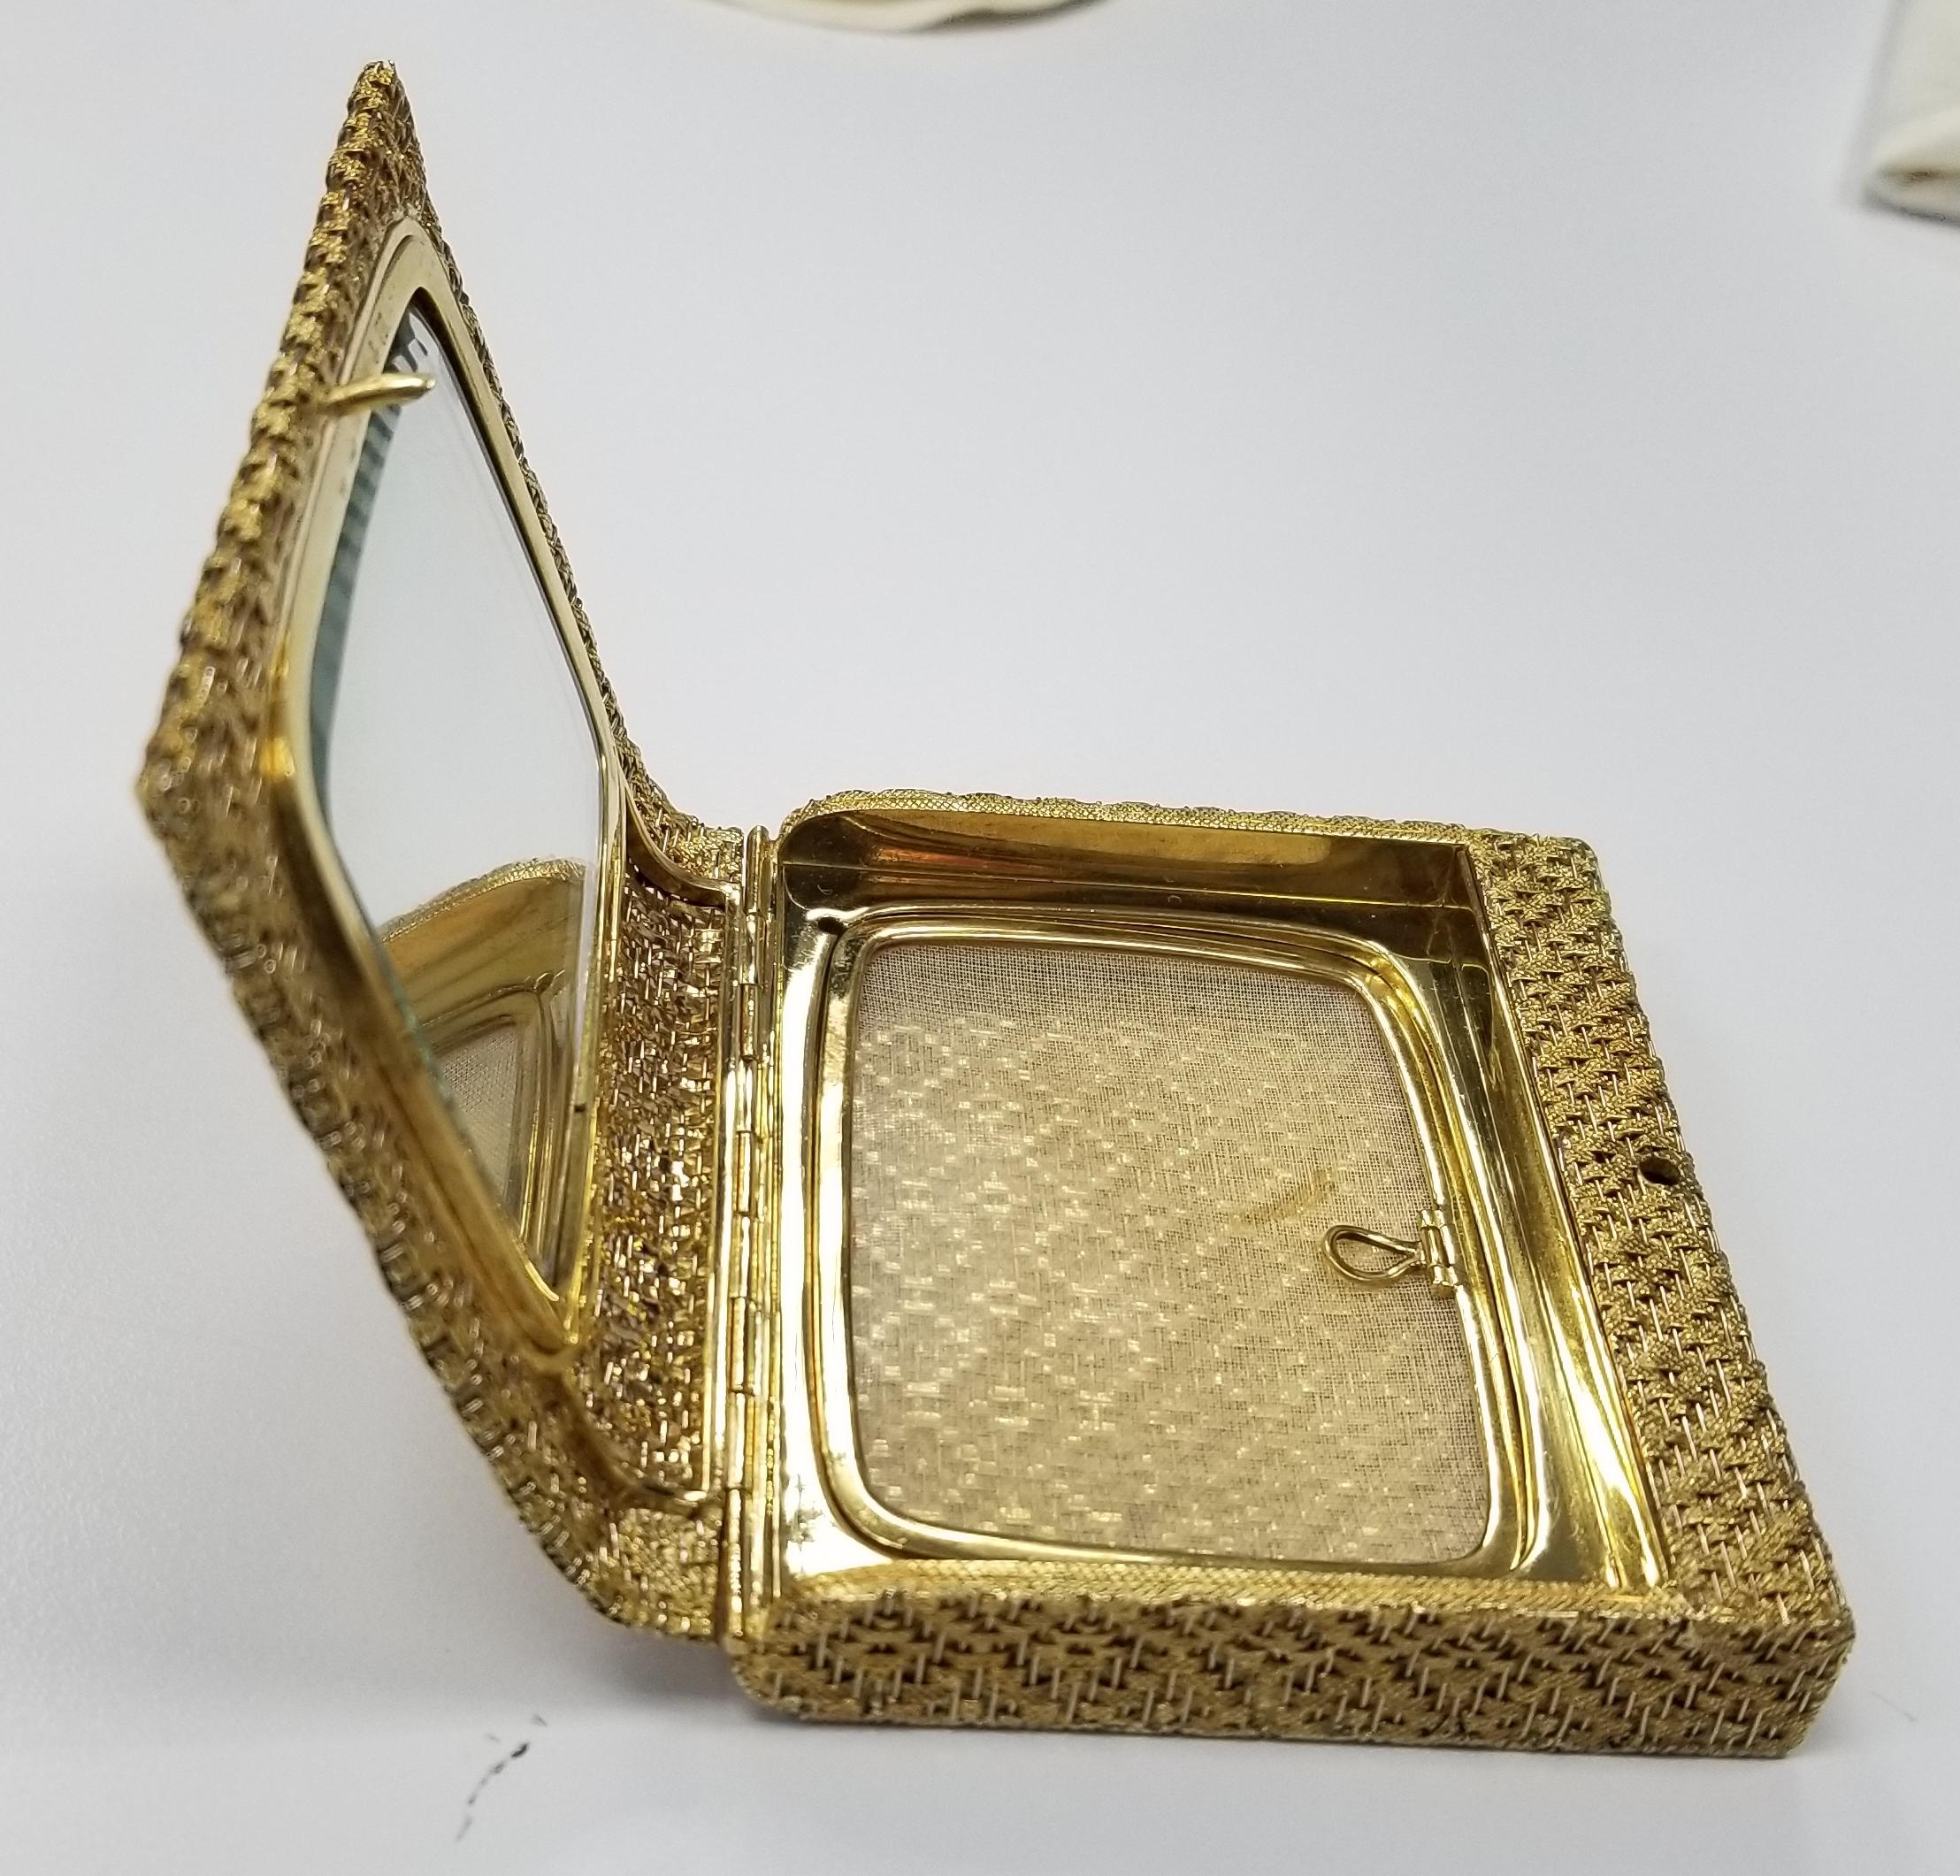 This 1980's Tiffany & Co. compact is of Italian provenance, crafted in solid 18K yellow gold, weighing 194grams and measuring 3.25